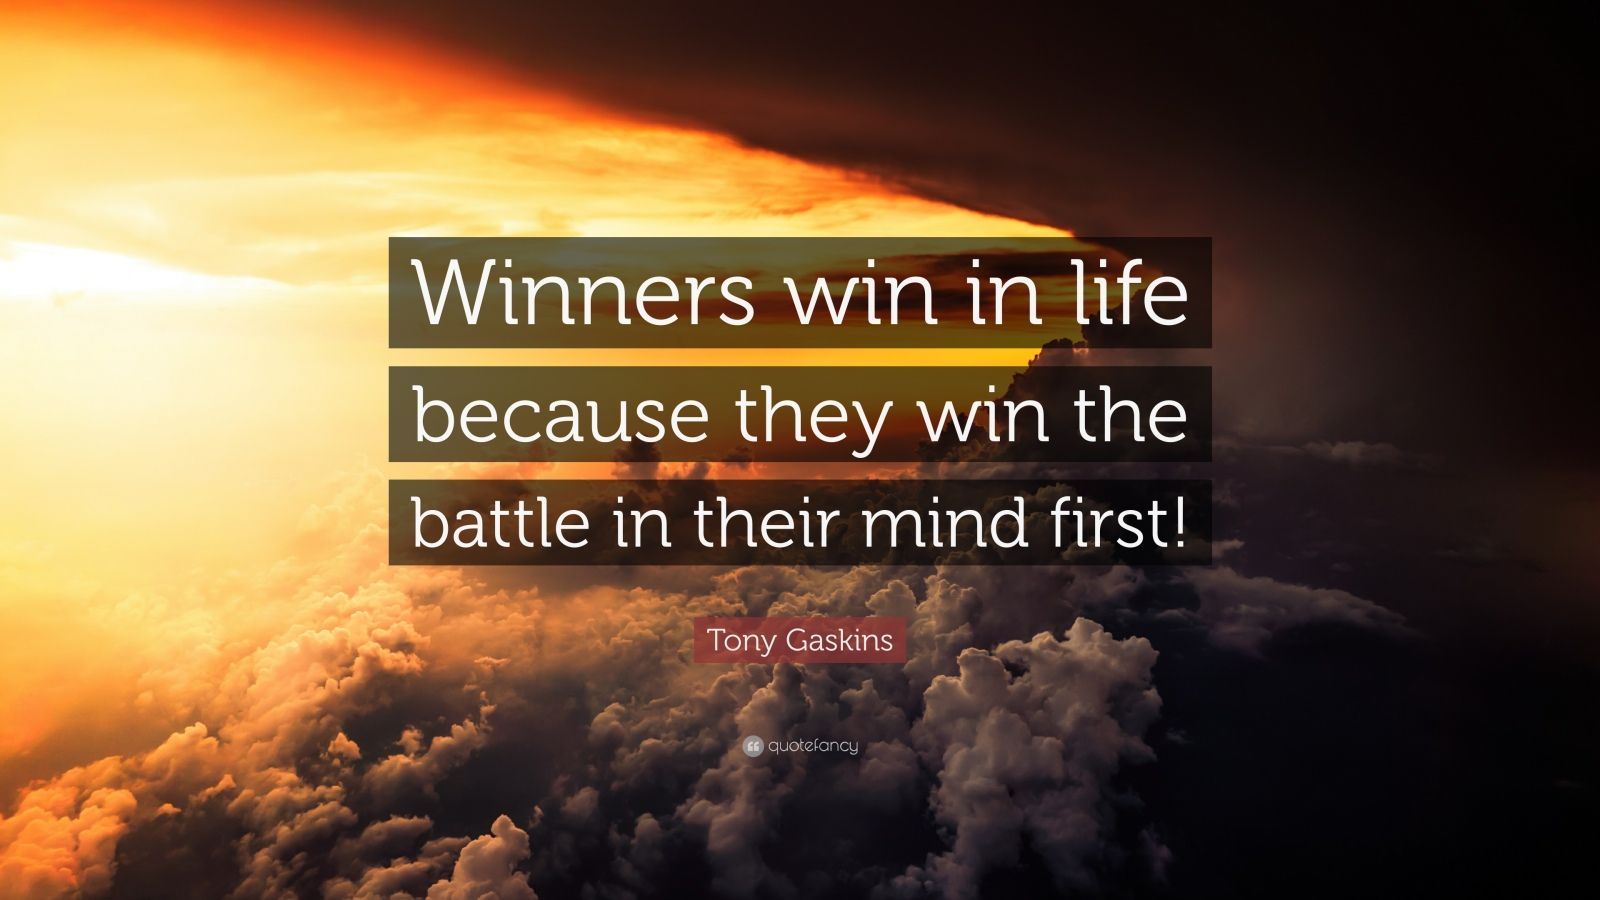 Tony Gaskins Quote: “Winners win in life because they win the battle in